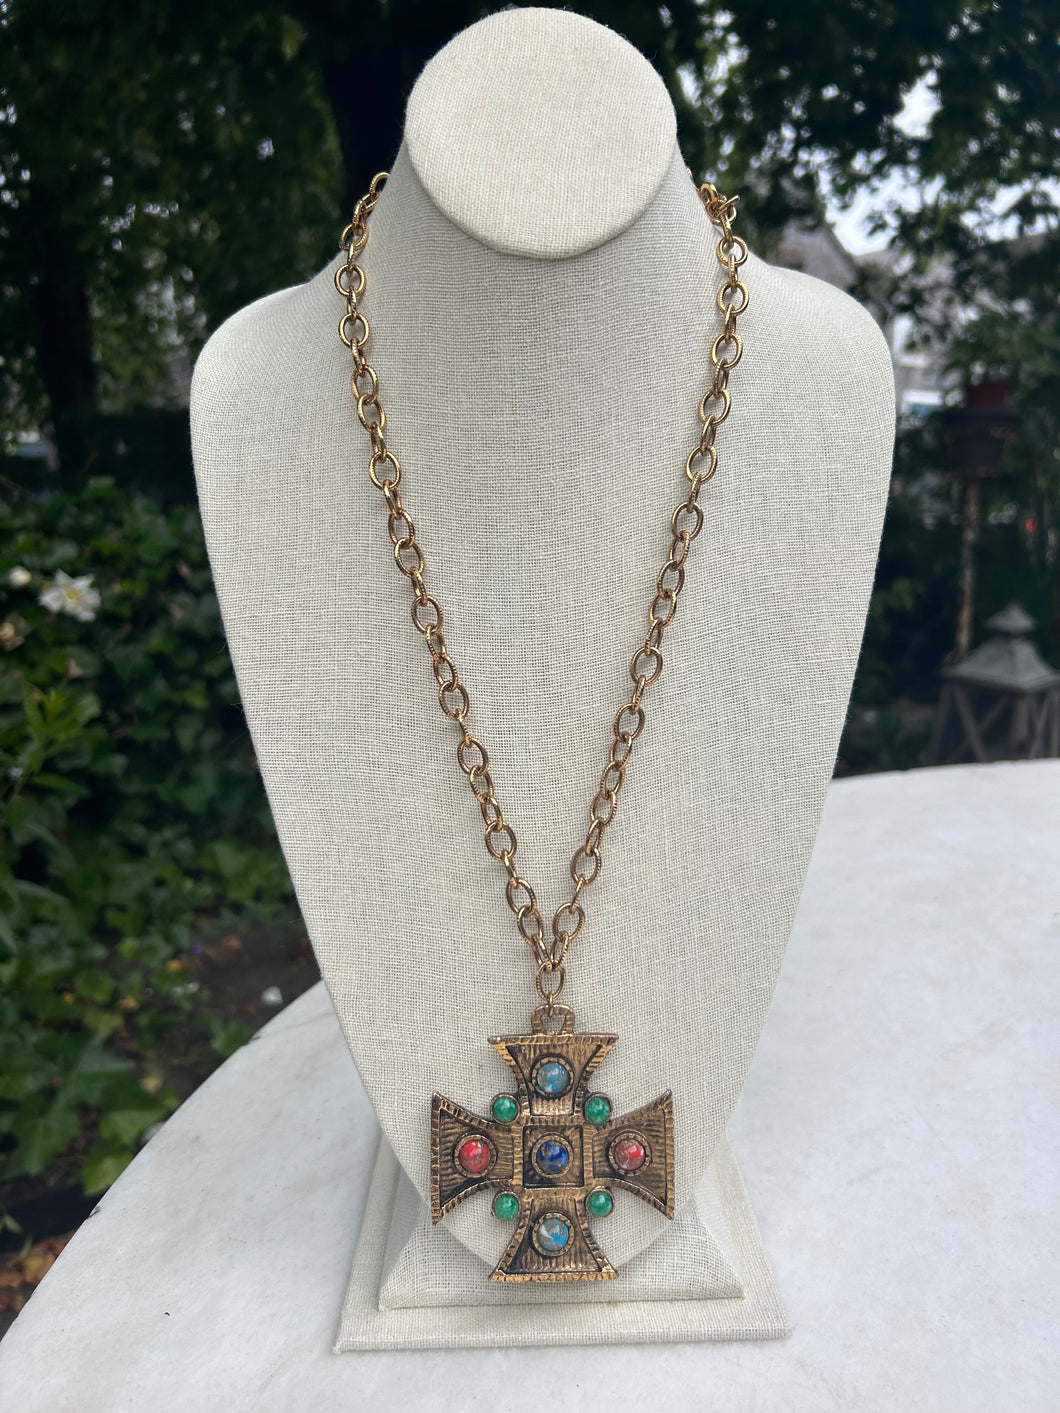 Vintage Cross Necklace with Multi Colored Gems